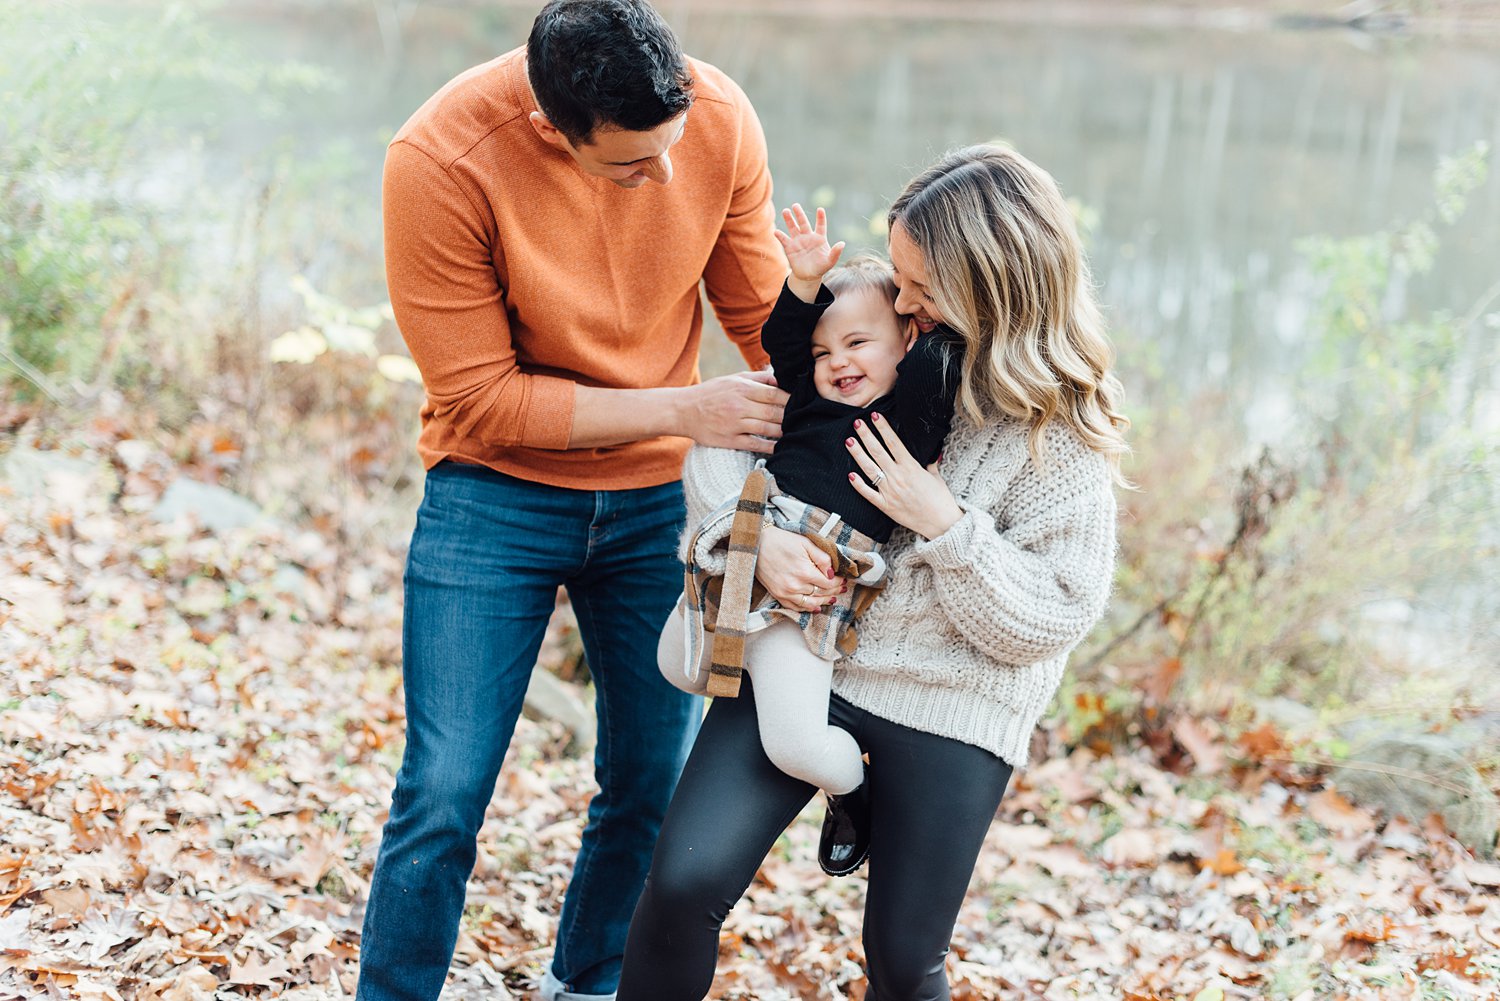 The Laibs - Lake Needwood Family Session - Montgomery County Maryland family photographer - Alison Dunn Photoraphy photo